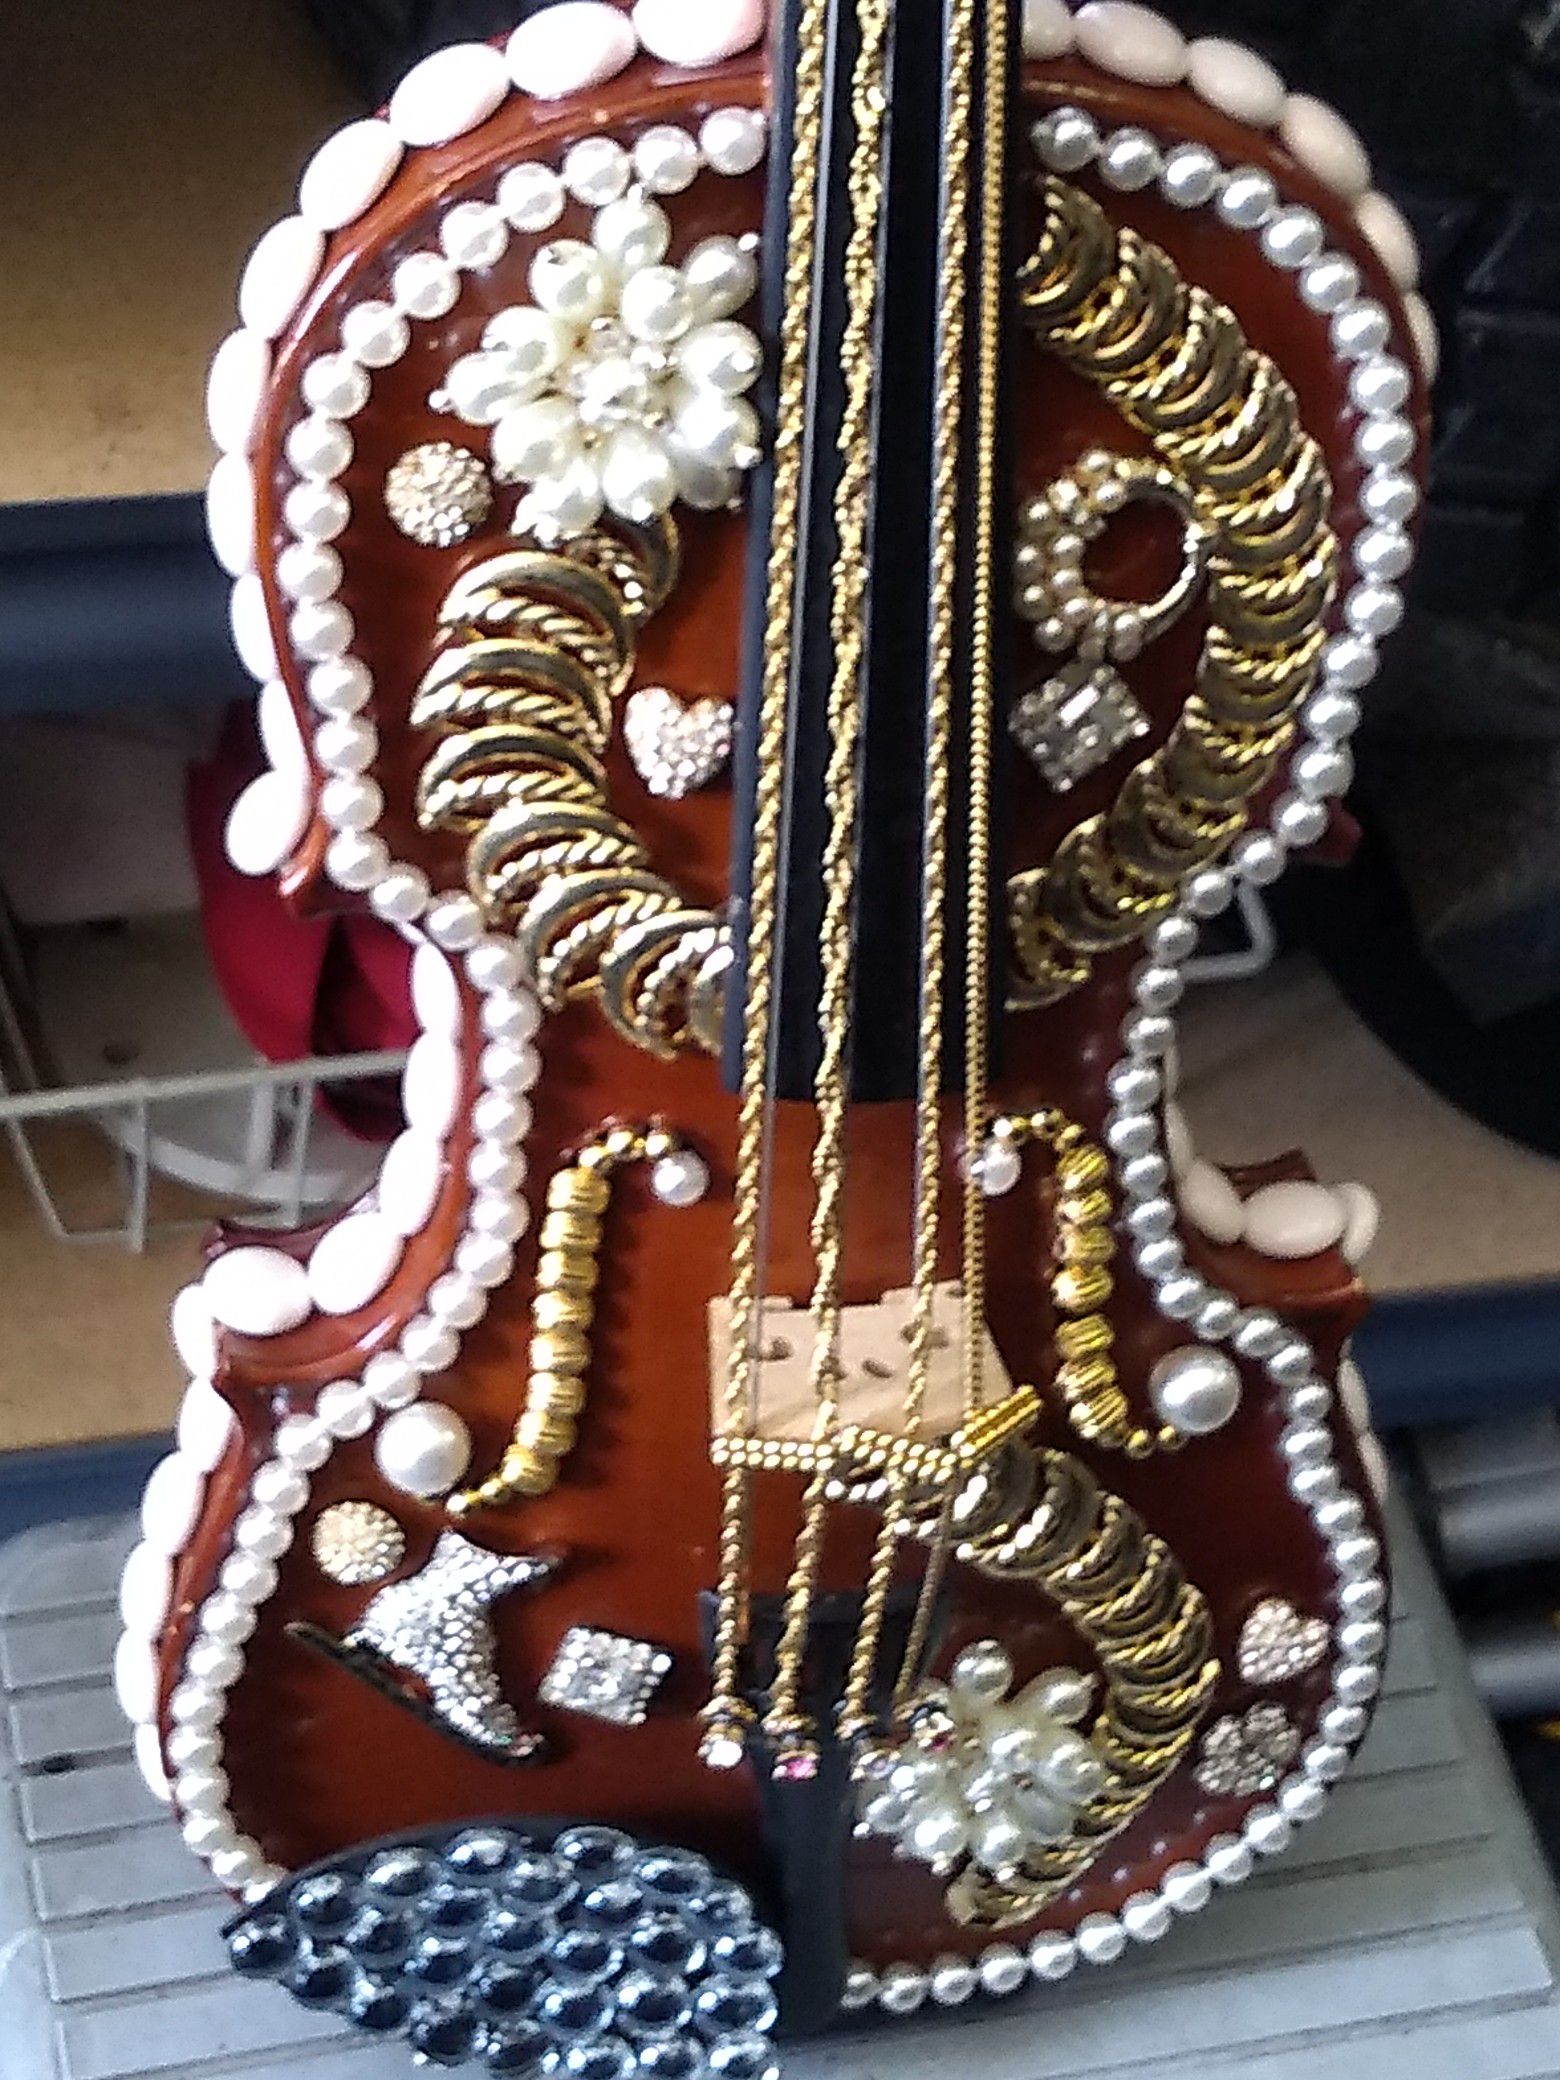 Bedazzled violin only for decor